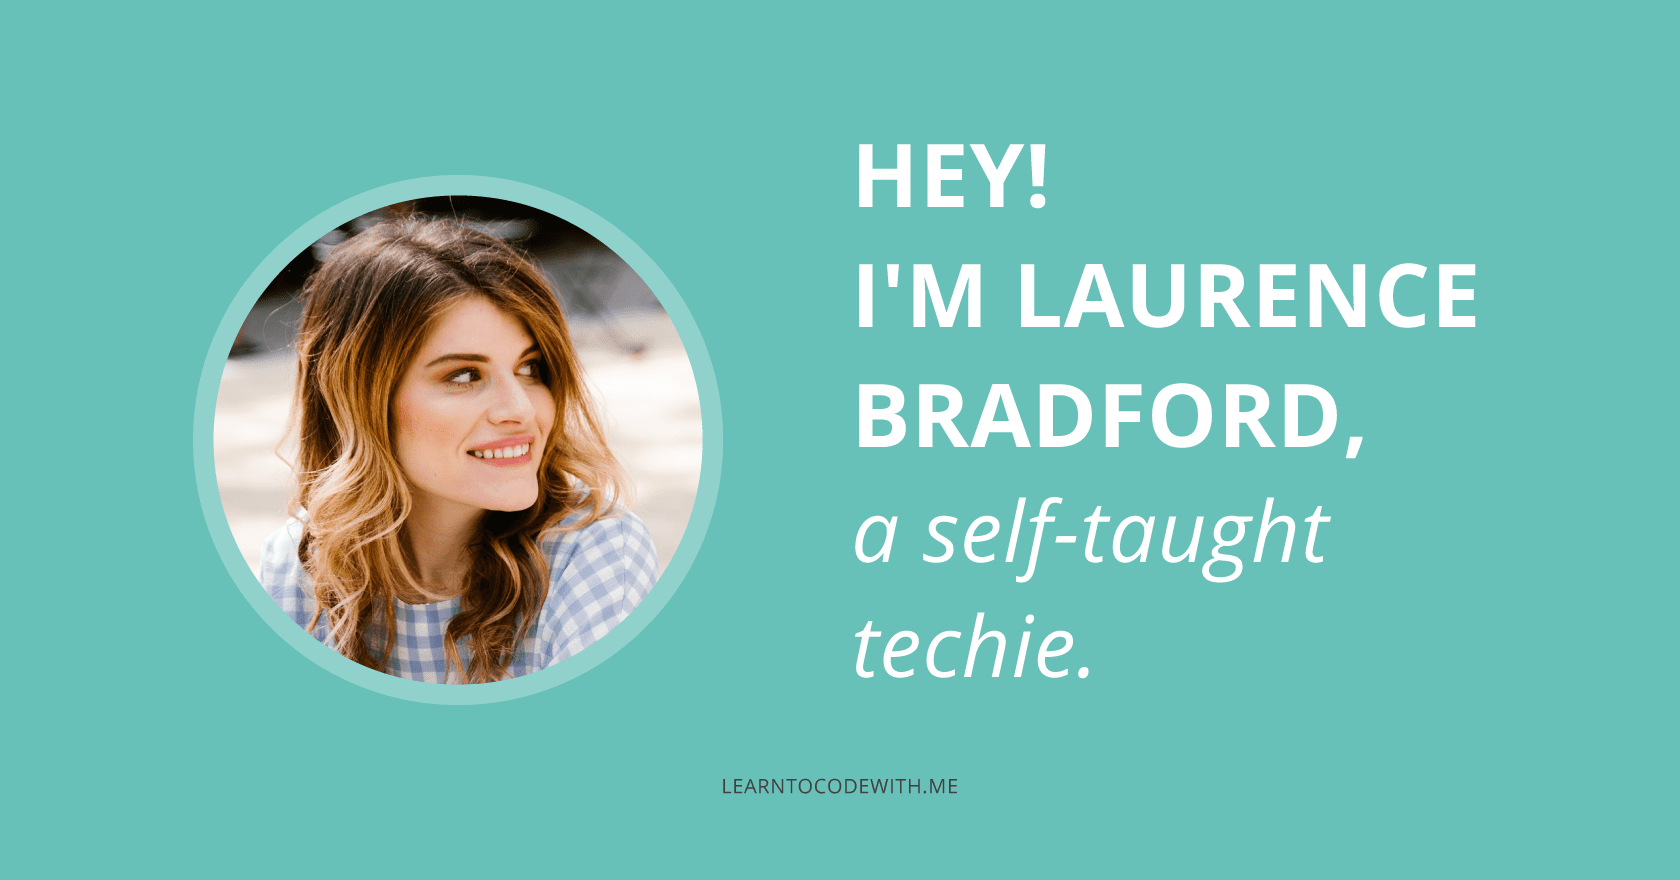 Hey! I'm Laurence Bradford, a self-taught techie.